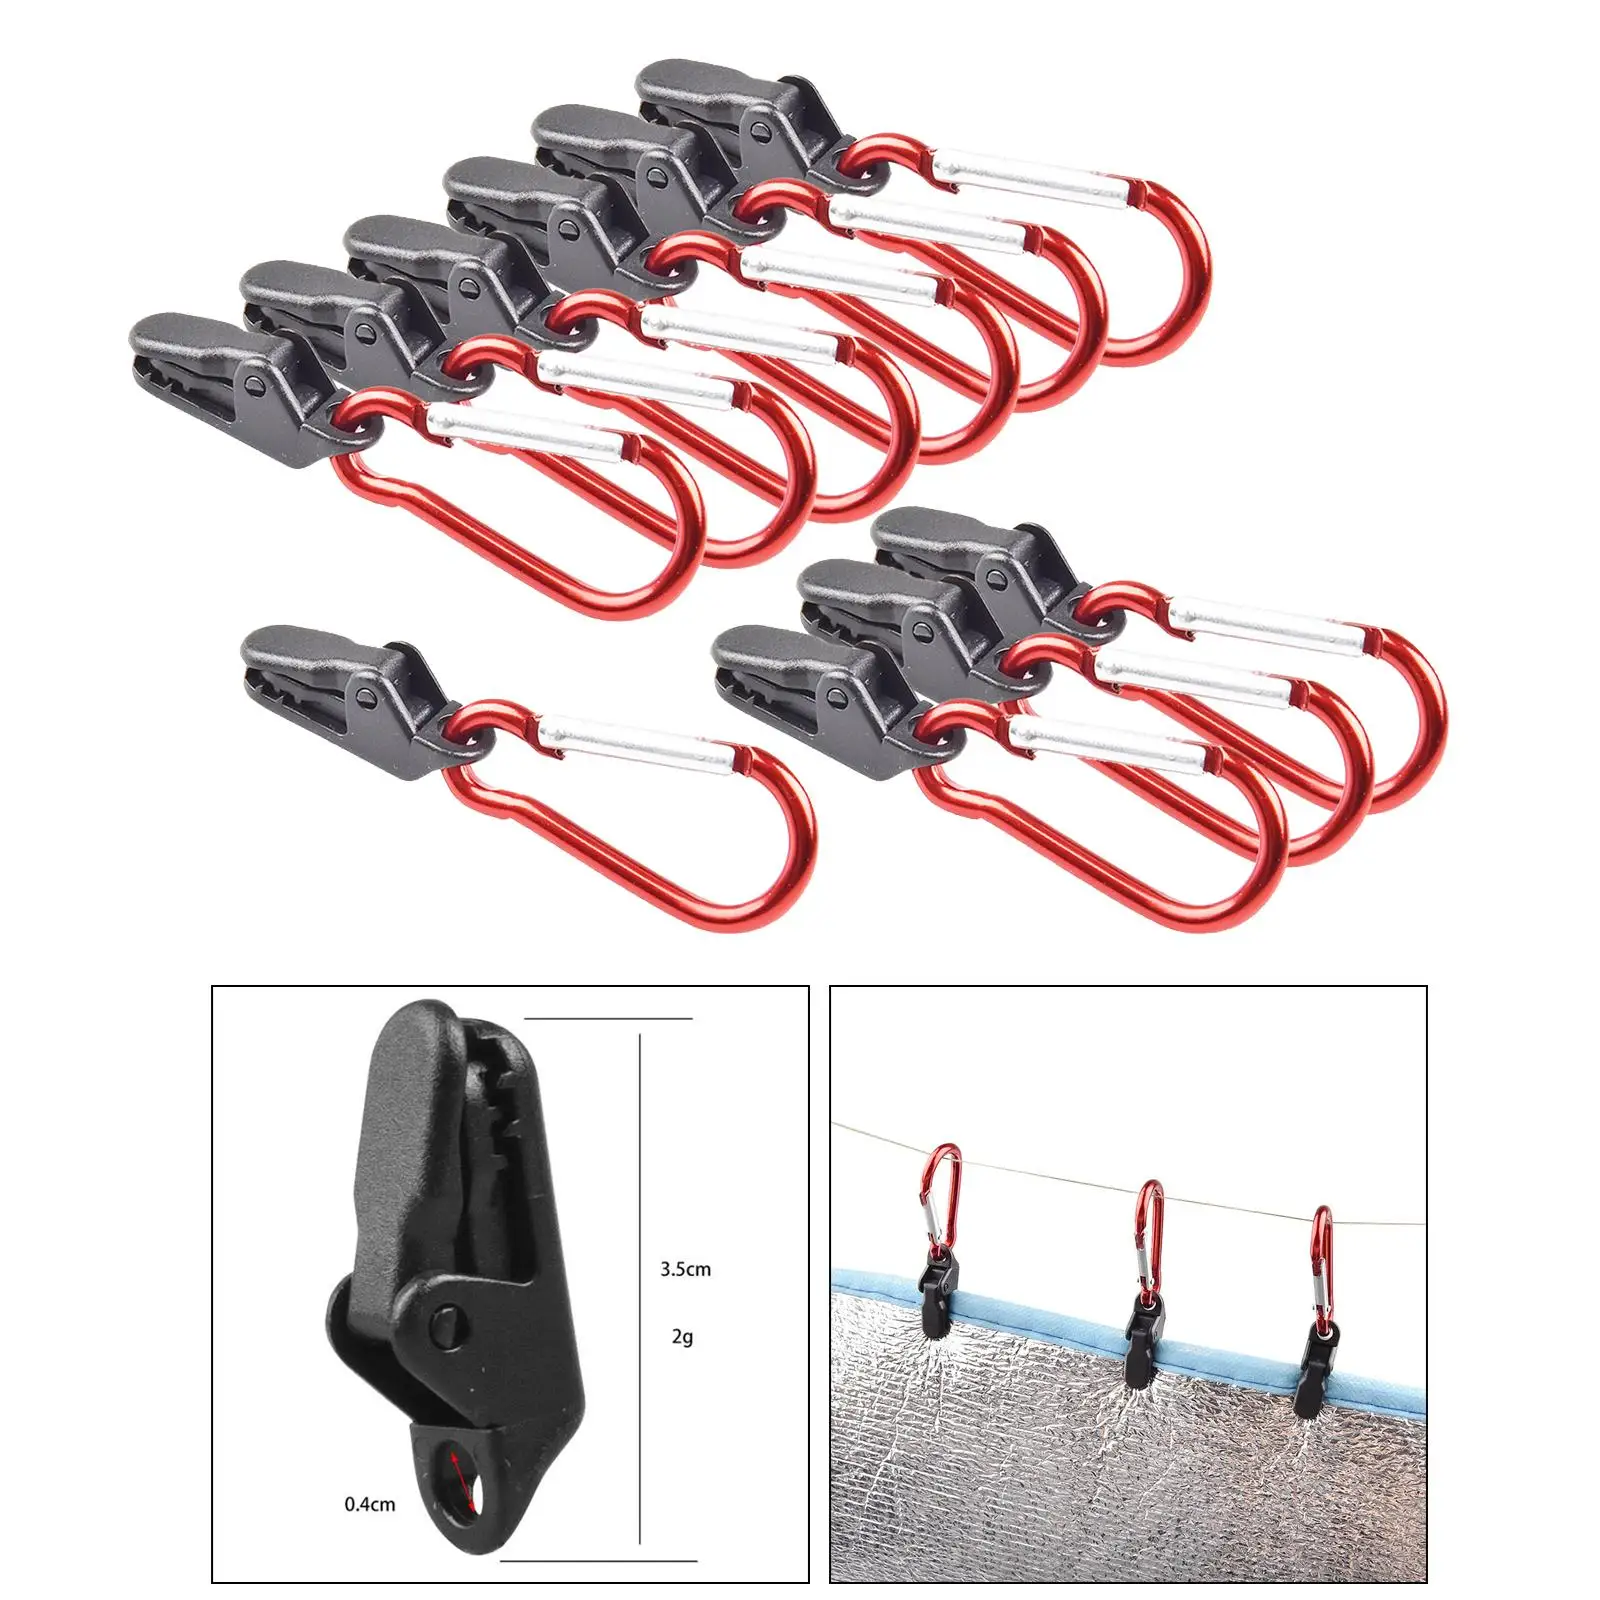 10pcs Tarp Clips Buckle,Heavy Duty   Grip Tent Clamps Tightening Lock Grip Clamps for Outdoor Camping Hiking Traveling